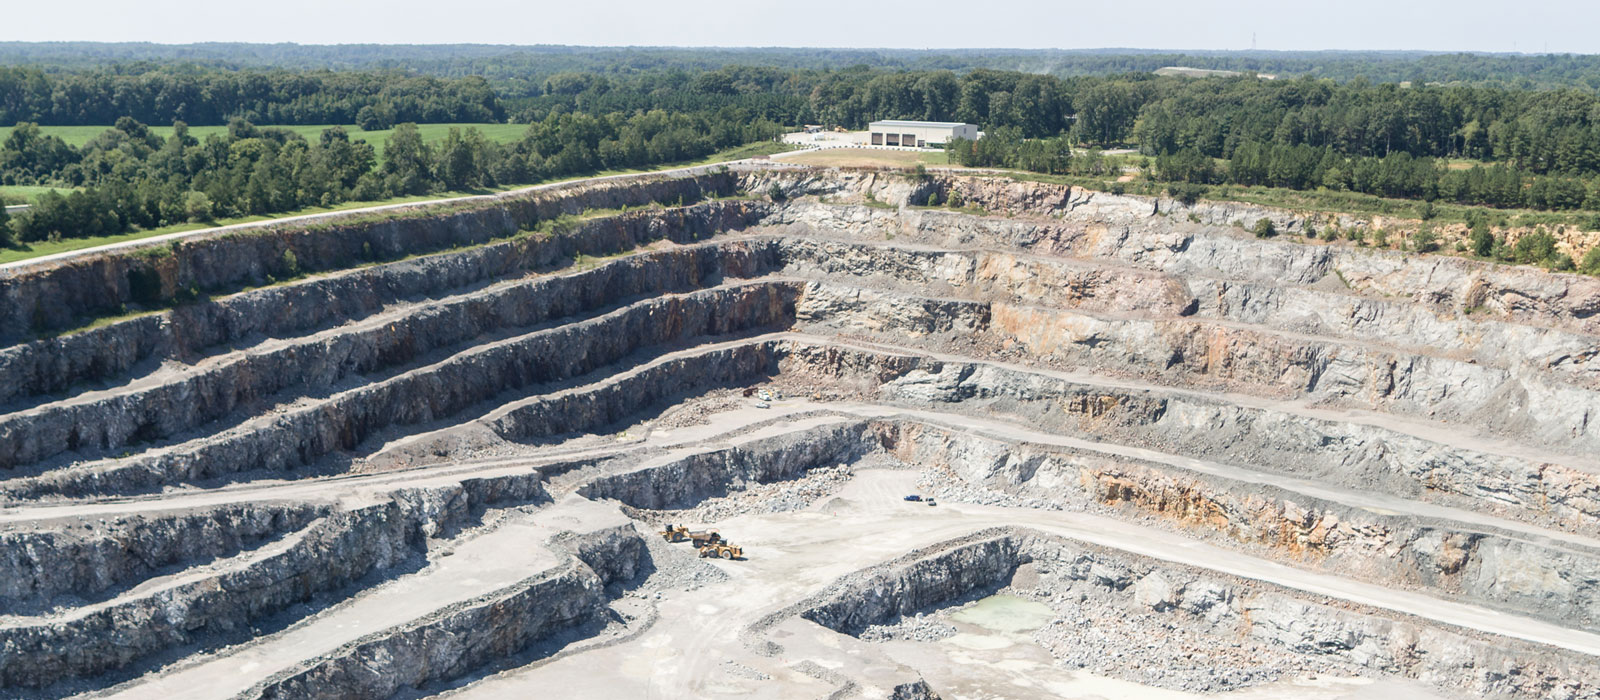 Aerial View of a Quarry & Mining Site